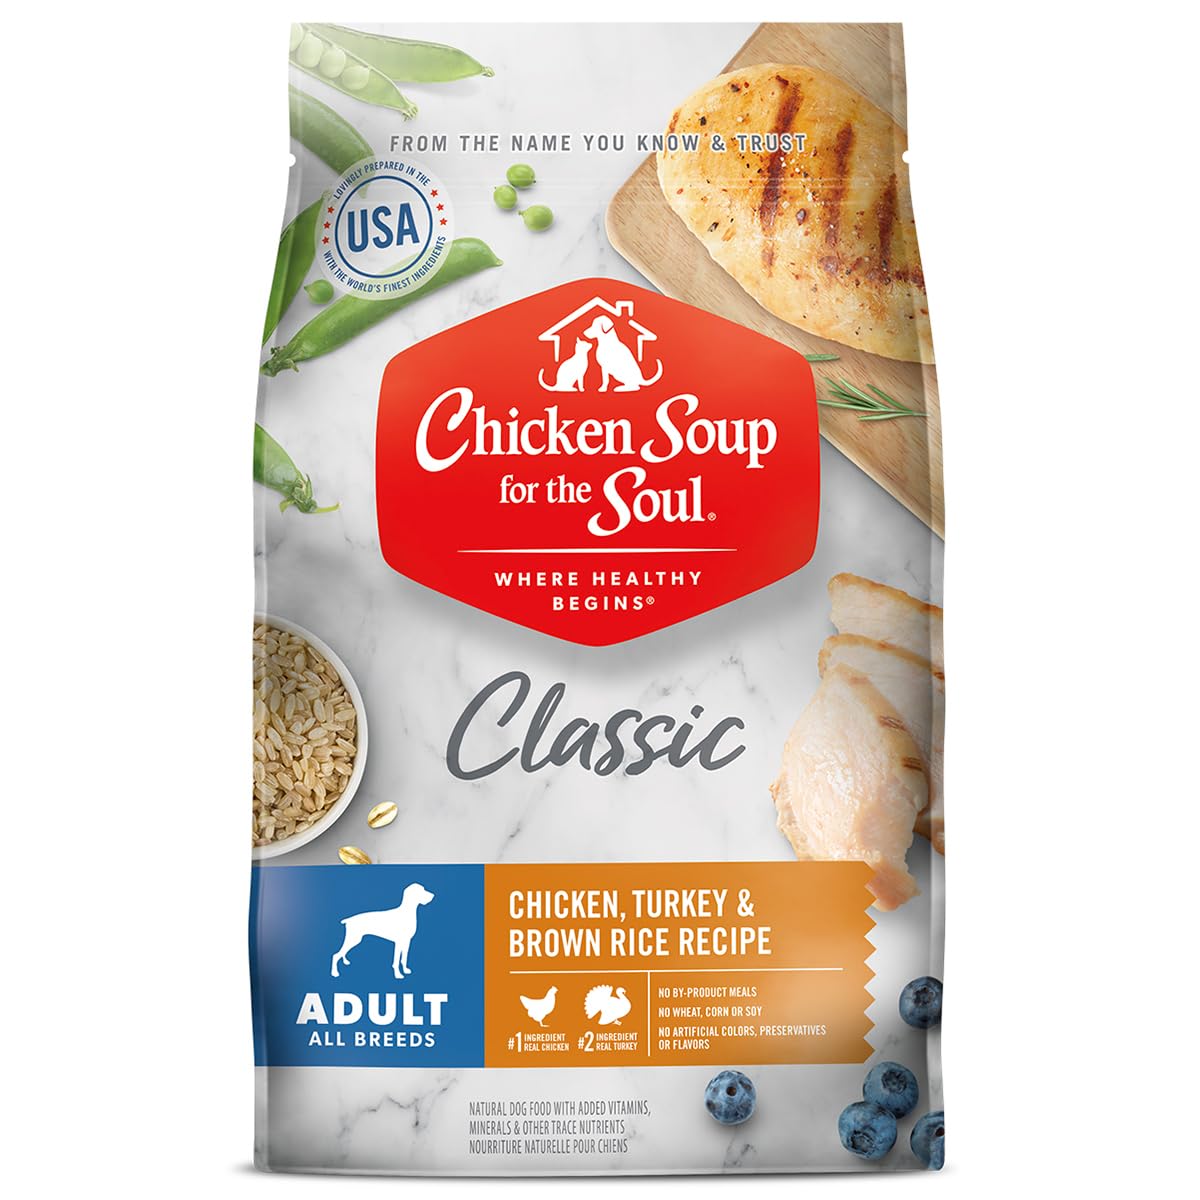 Chicken Soup for the Soul - Weight Care Dog Food, Brown Rice, and Turkey Recipe, Soy Free, Corn Free, Wheat Free Dry Made with Real Ingredients No Artificial Flavors or Preservatives